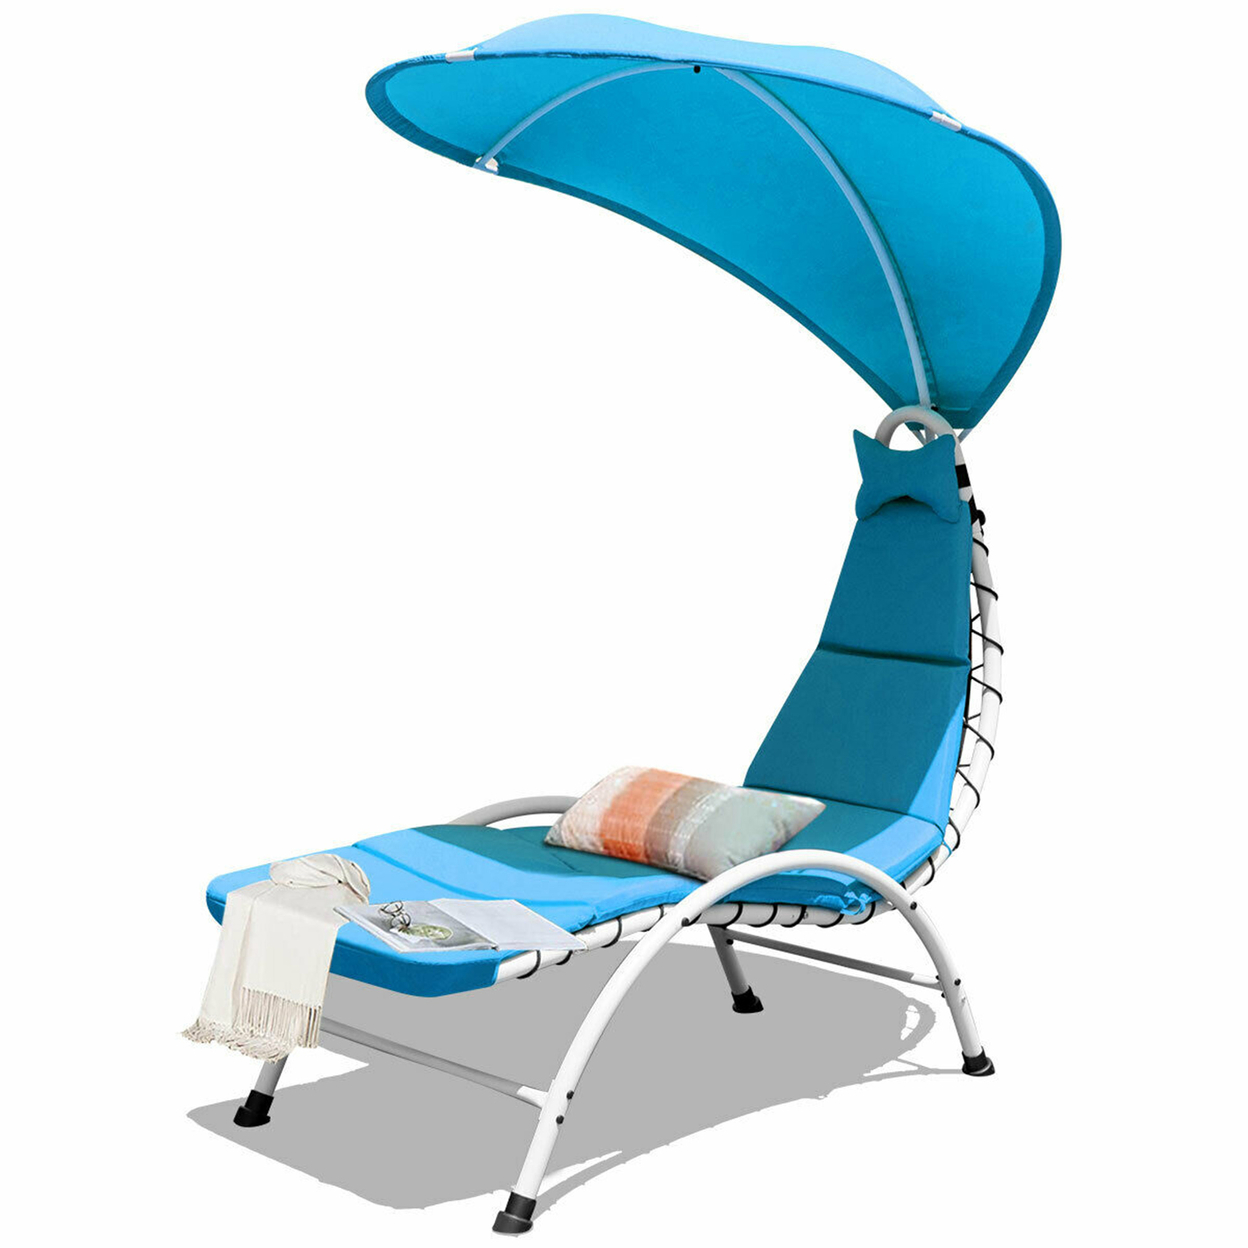 Patio Lounge Chair Chaise Outdoor W/ Steel Frame Cushion Canopy Turquoise